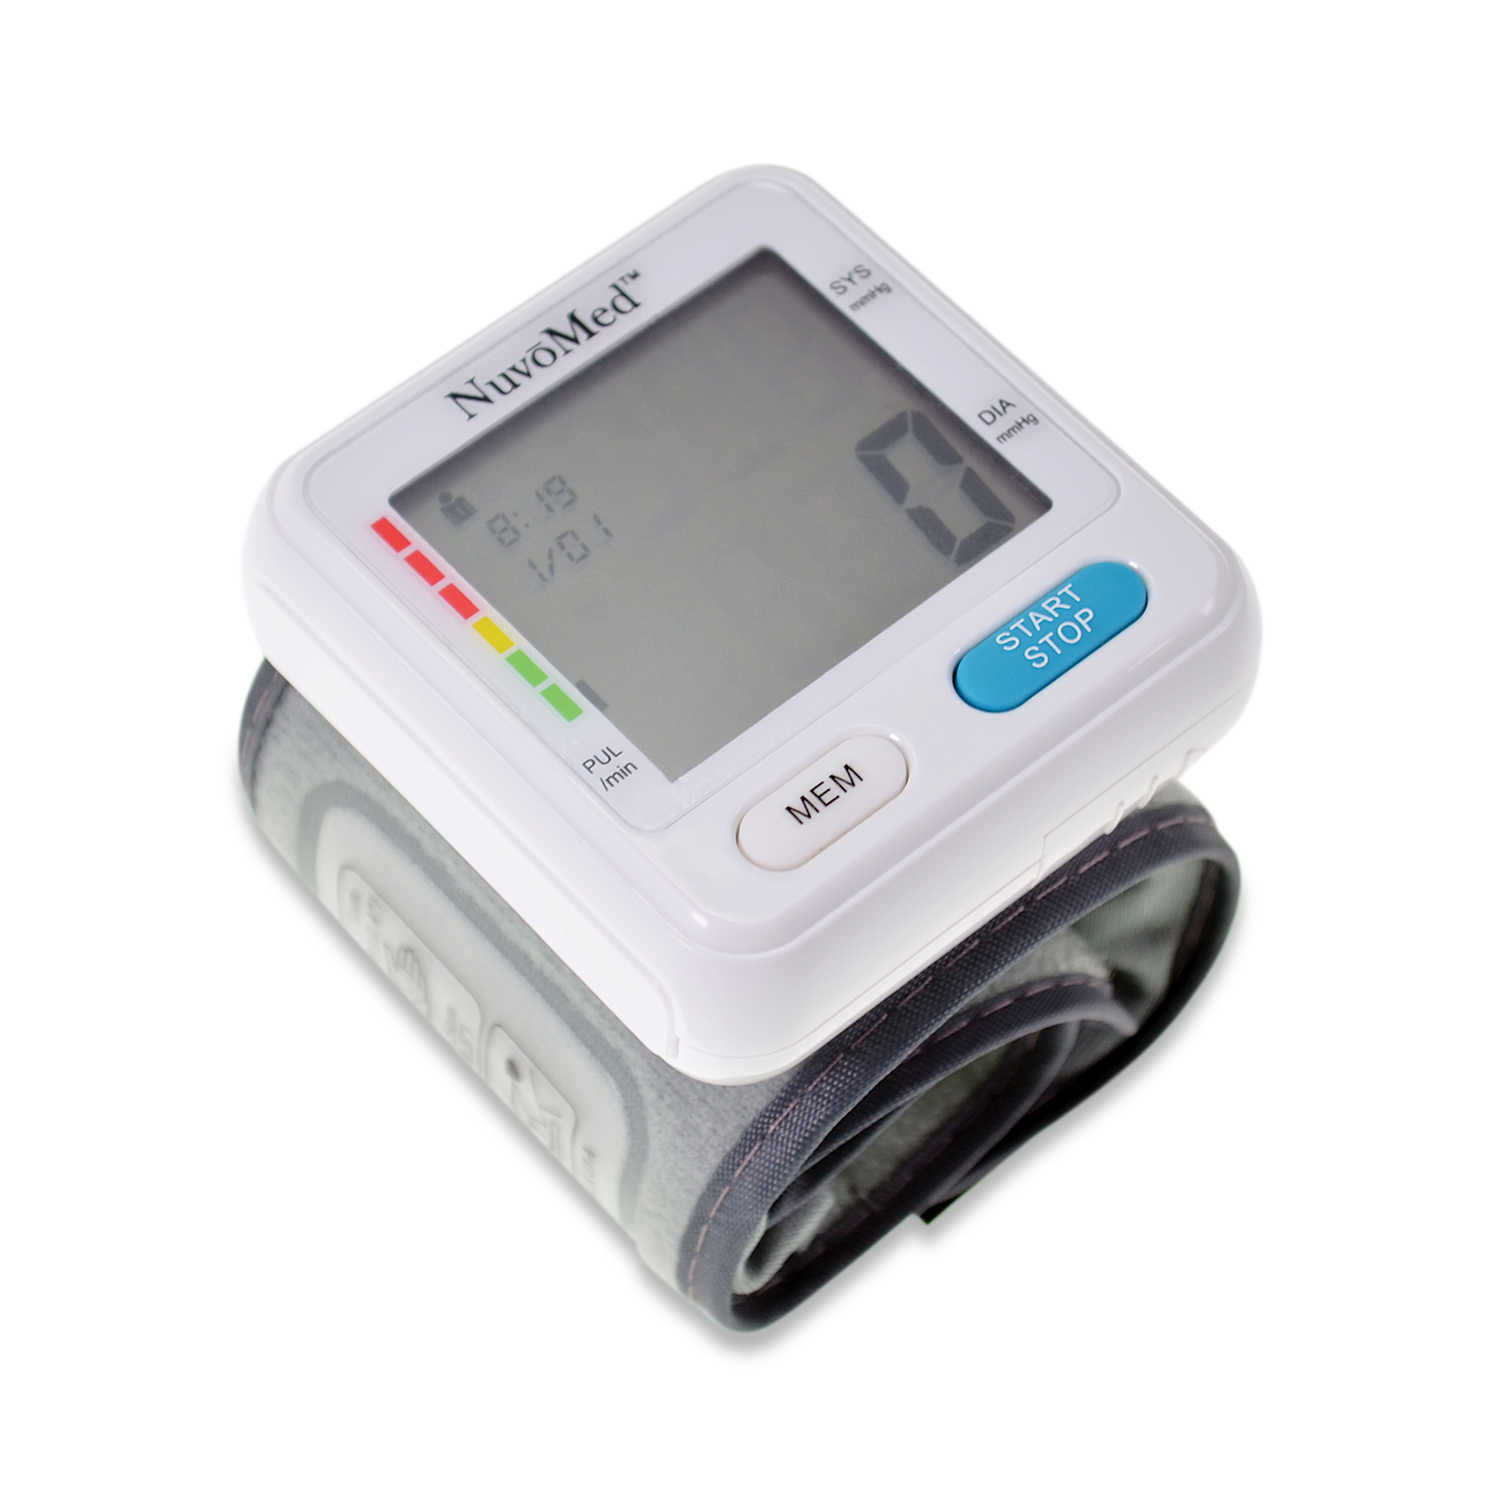 Digital Wrist Blood Pressure Monitor - Price Reduced for Clearance –  Tri-Med Medical Supplies, Inc.